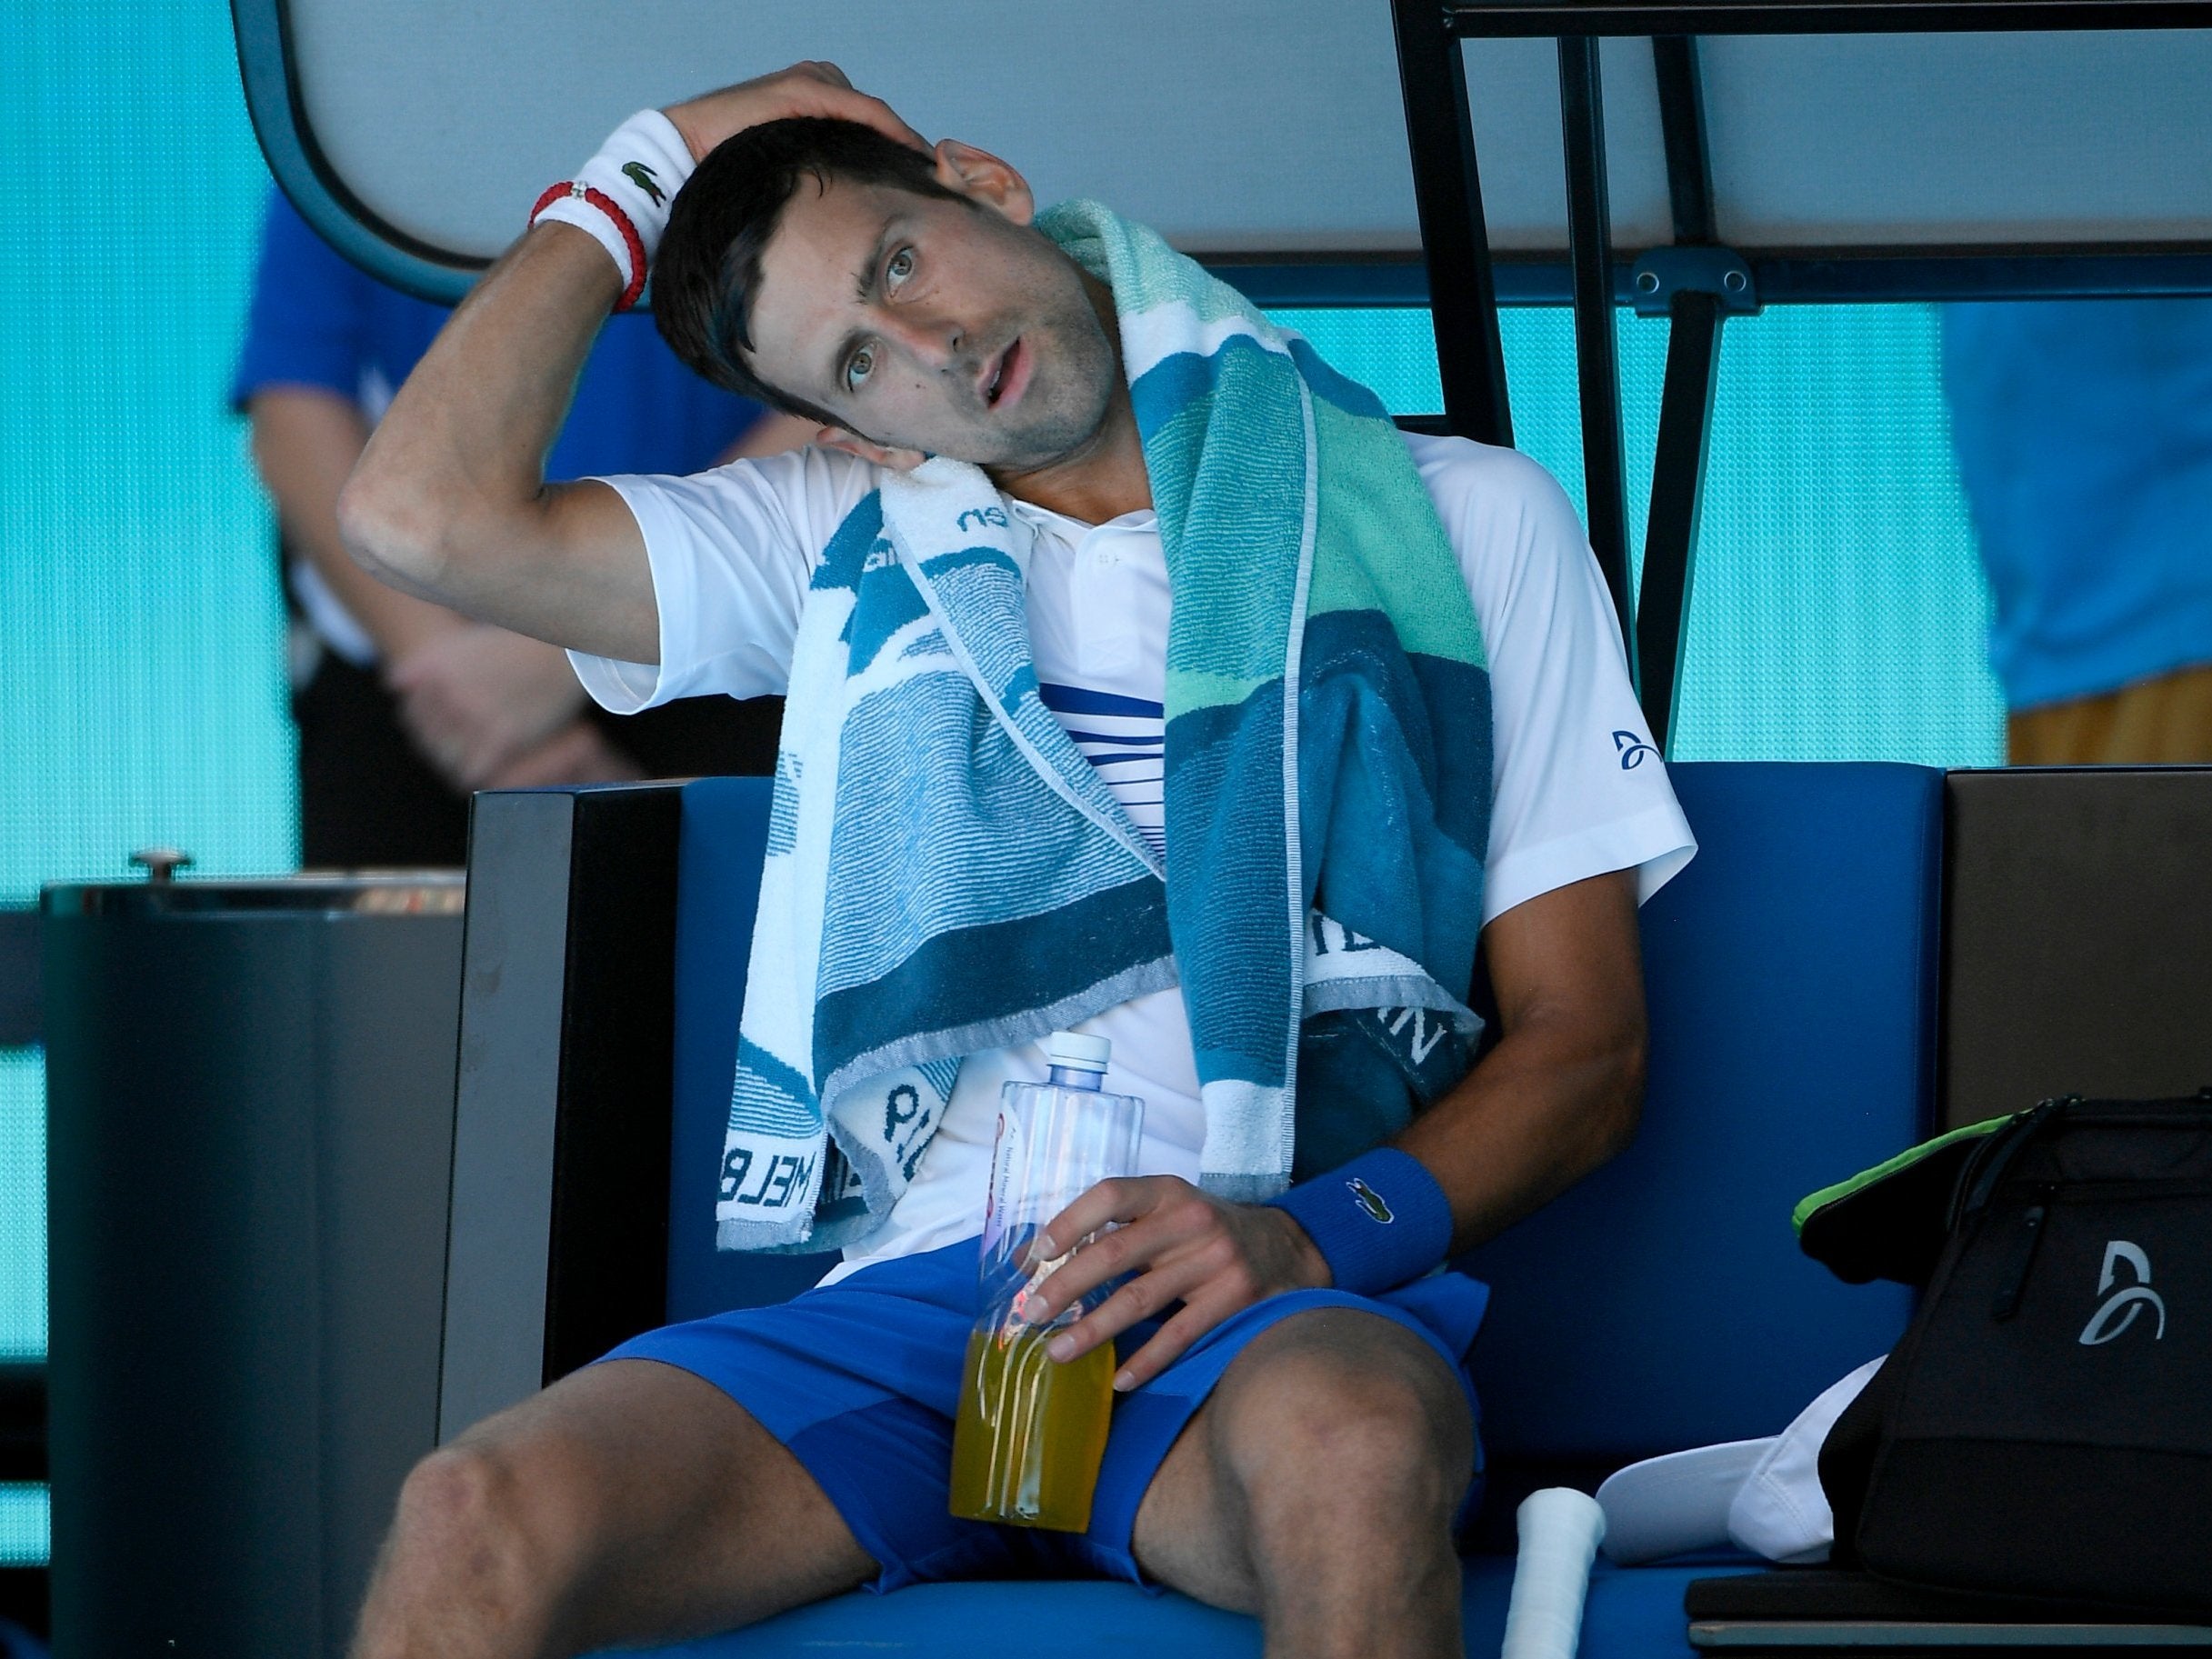 Djokovic went on to lose the next two games after his outburst